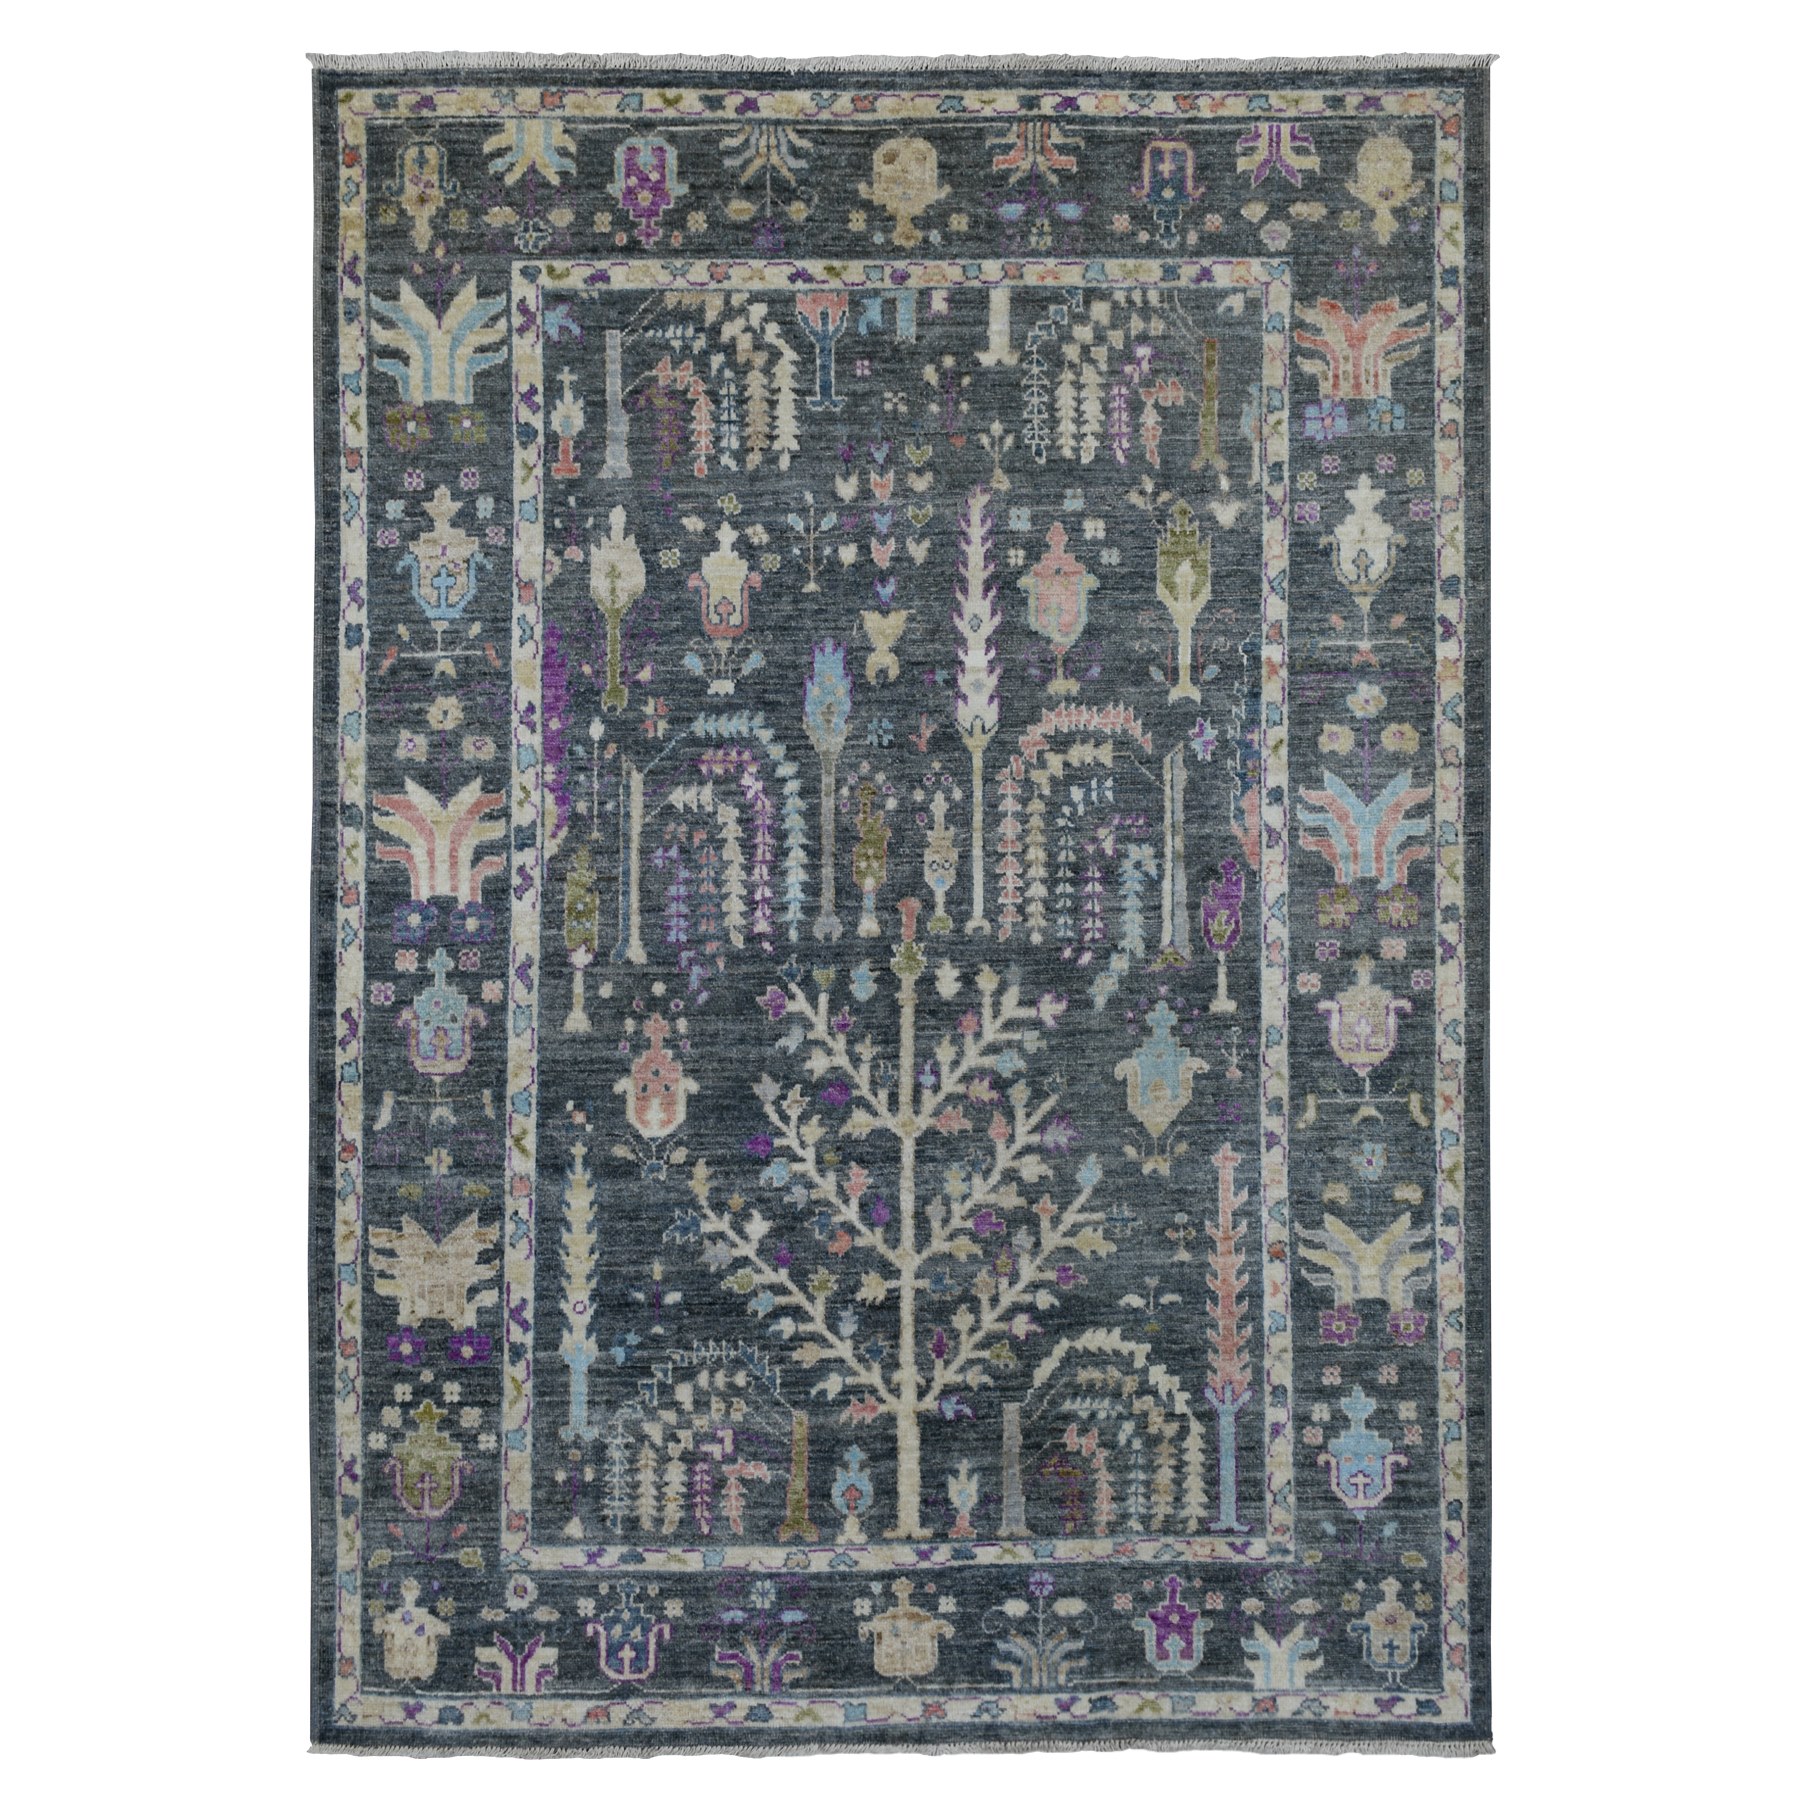 Oushak and Peshawar Hand Woven knotted Pink Oriental Rugs 